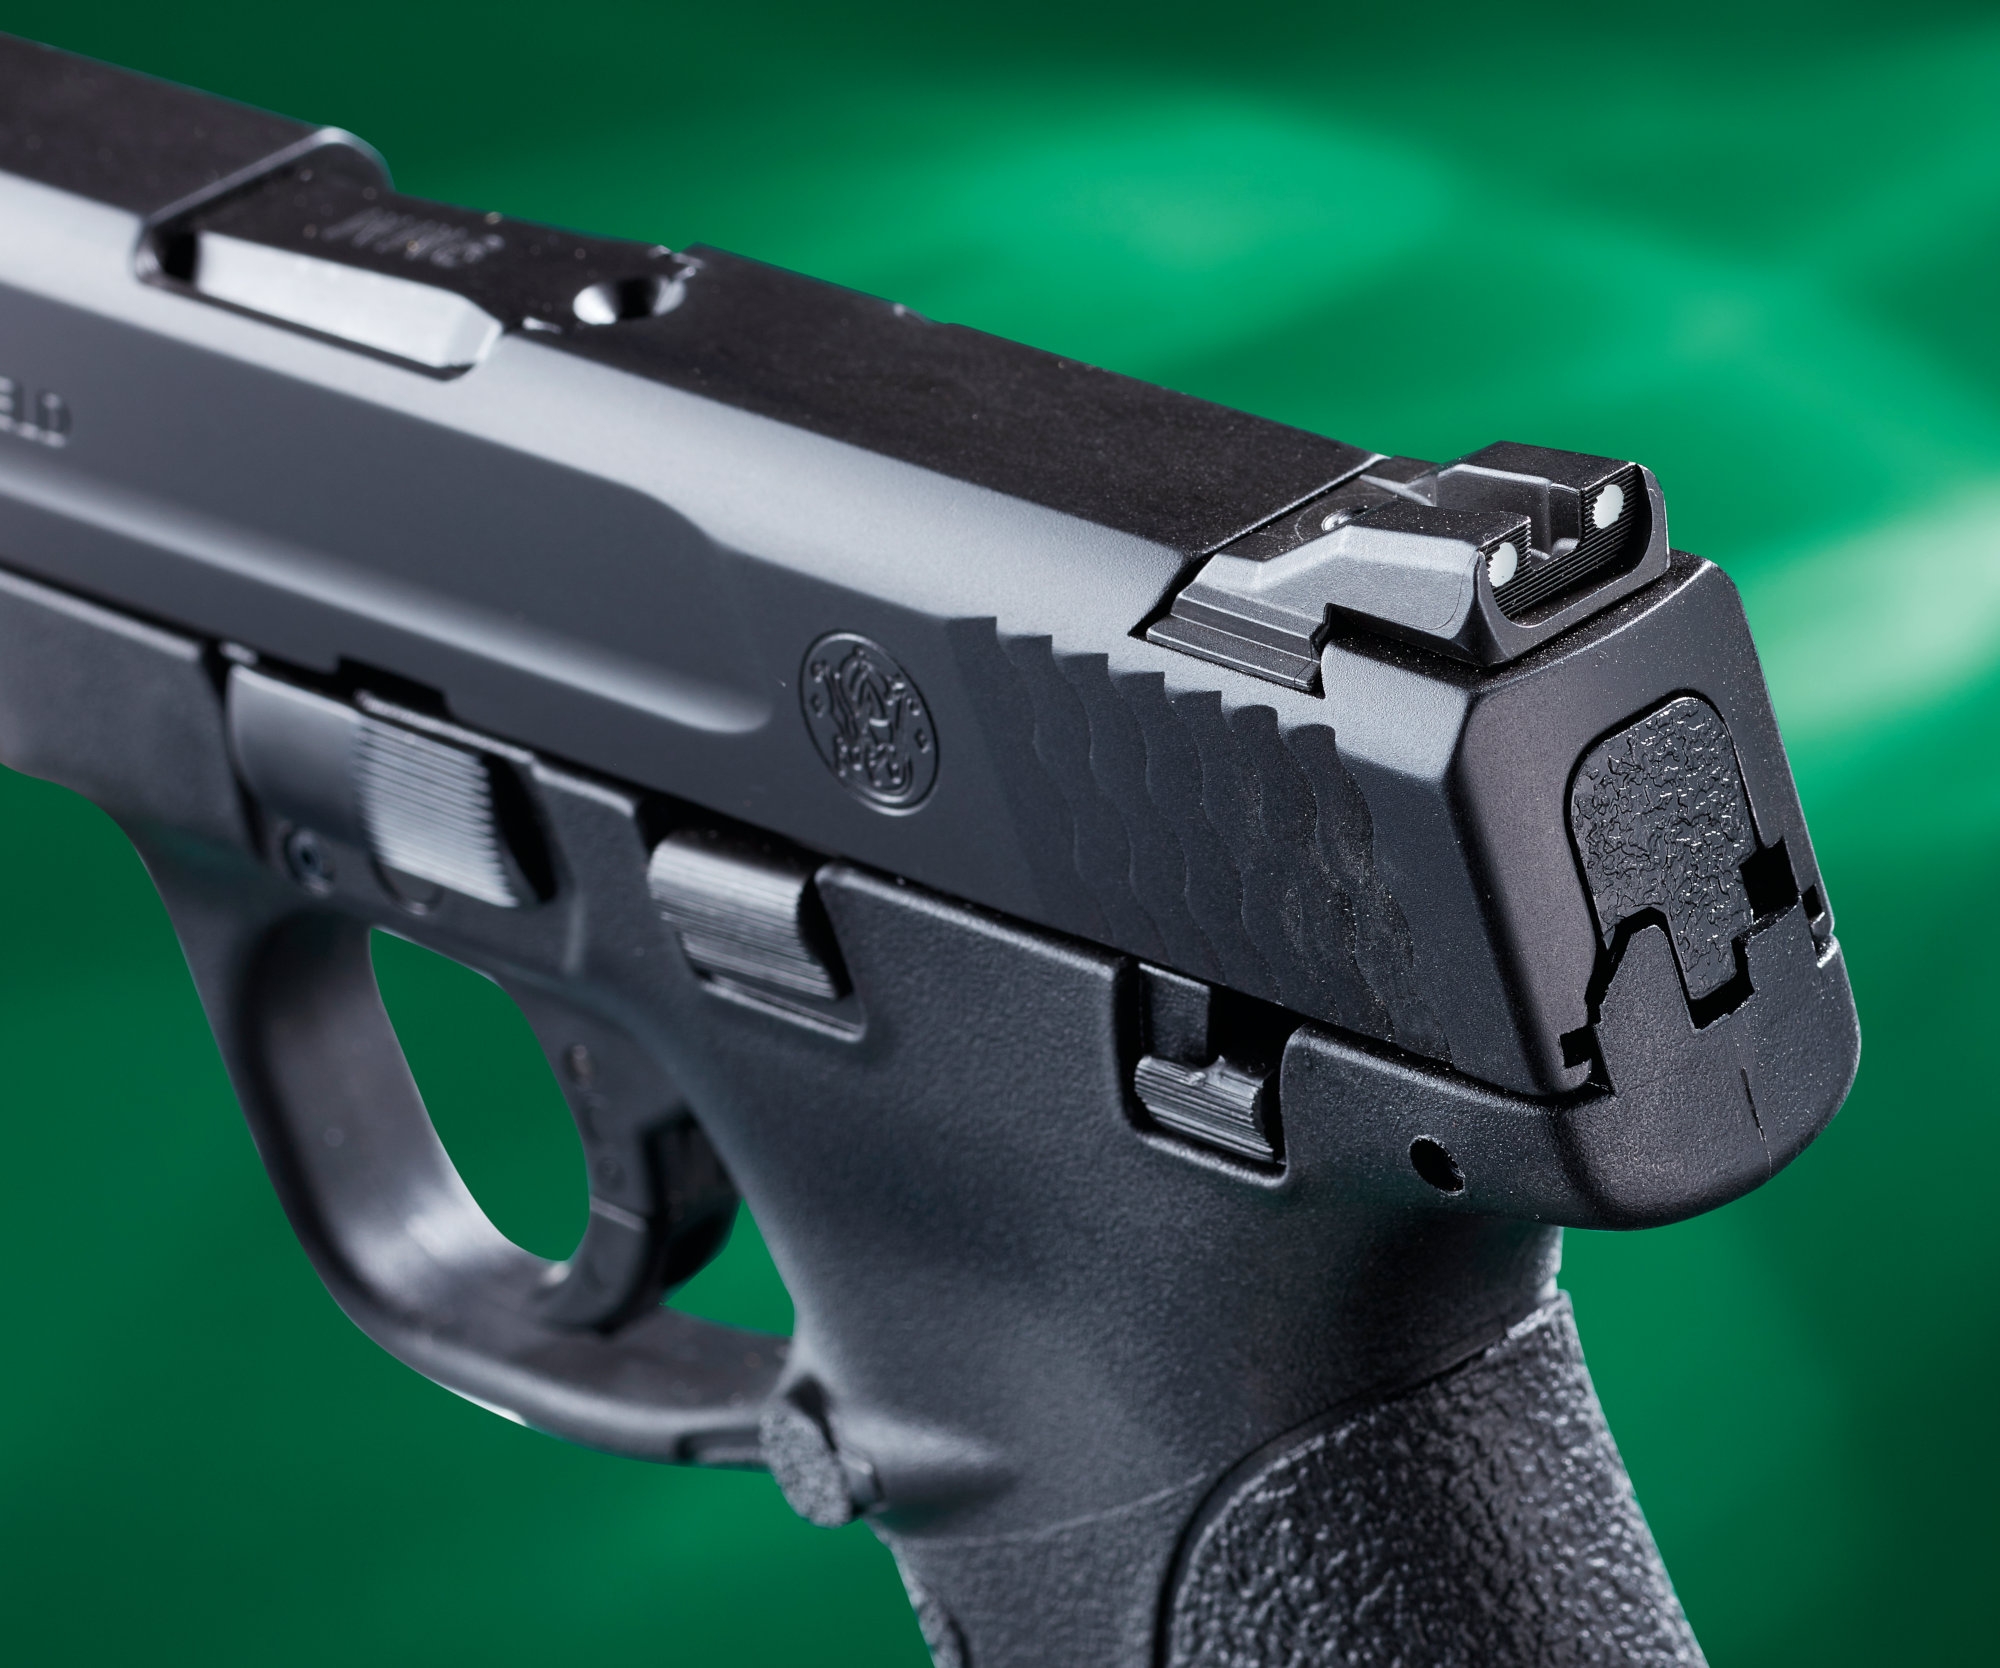 Smith & Wesson m&p9. Полимерные пистолеты. Smith & Wesson m&p overhauled by ed Brown.